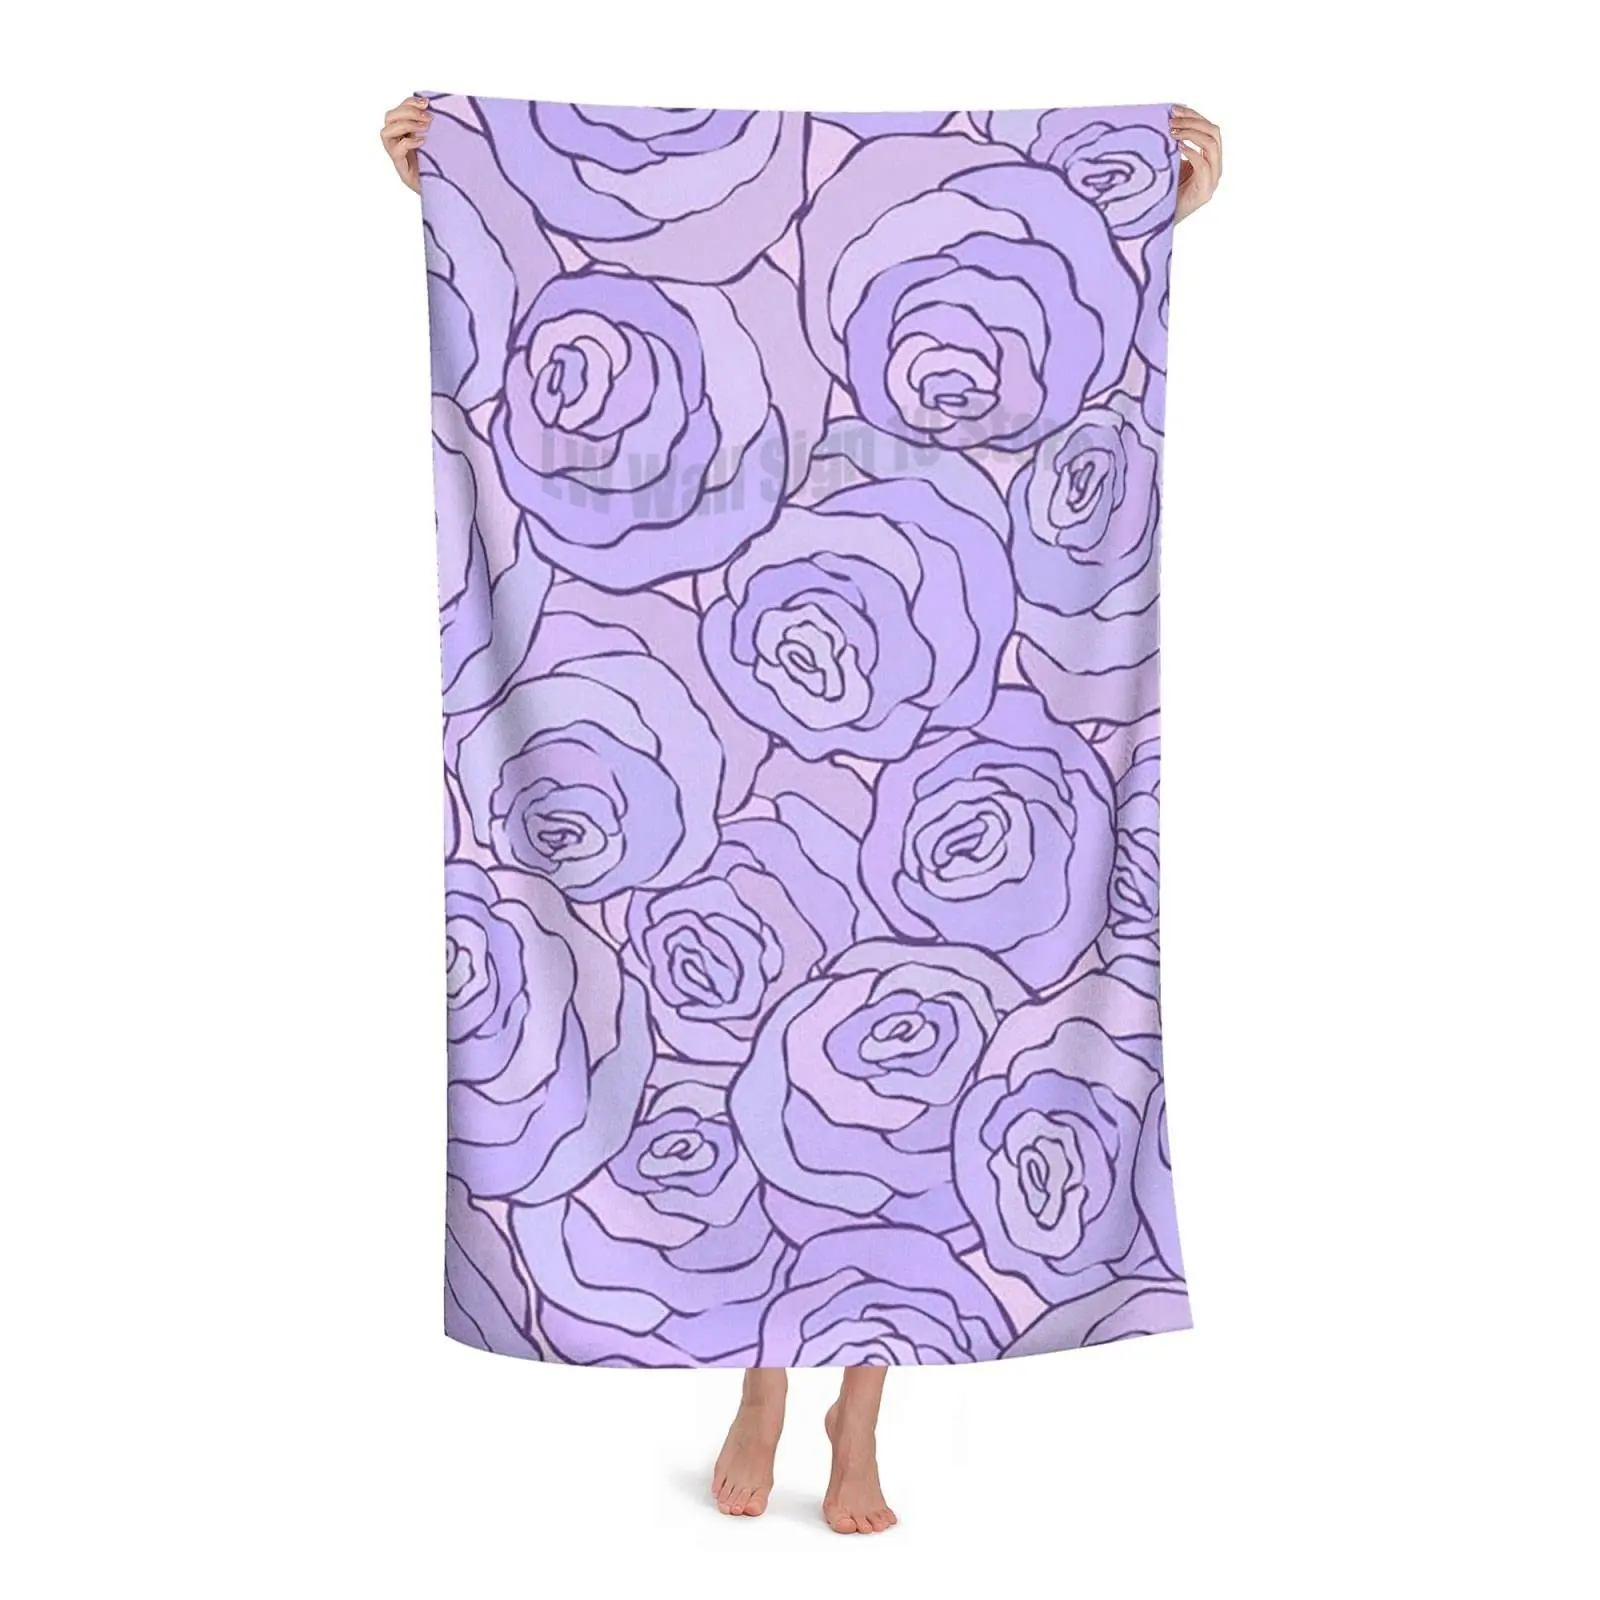 

Decorative Flower Microfiber Quick Drying Beach Towel Super Absorbent Towel Sand Free Towel for Kids Teens Adults Travel Gym